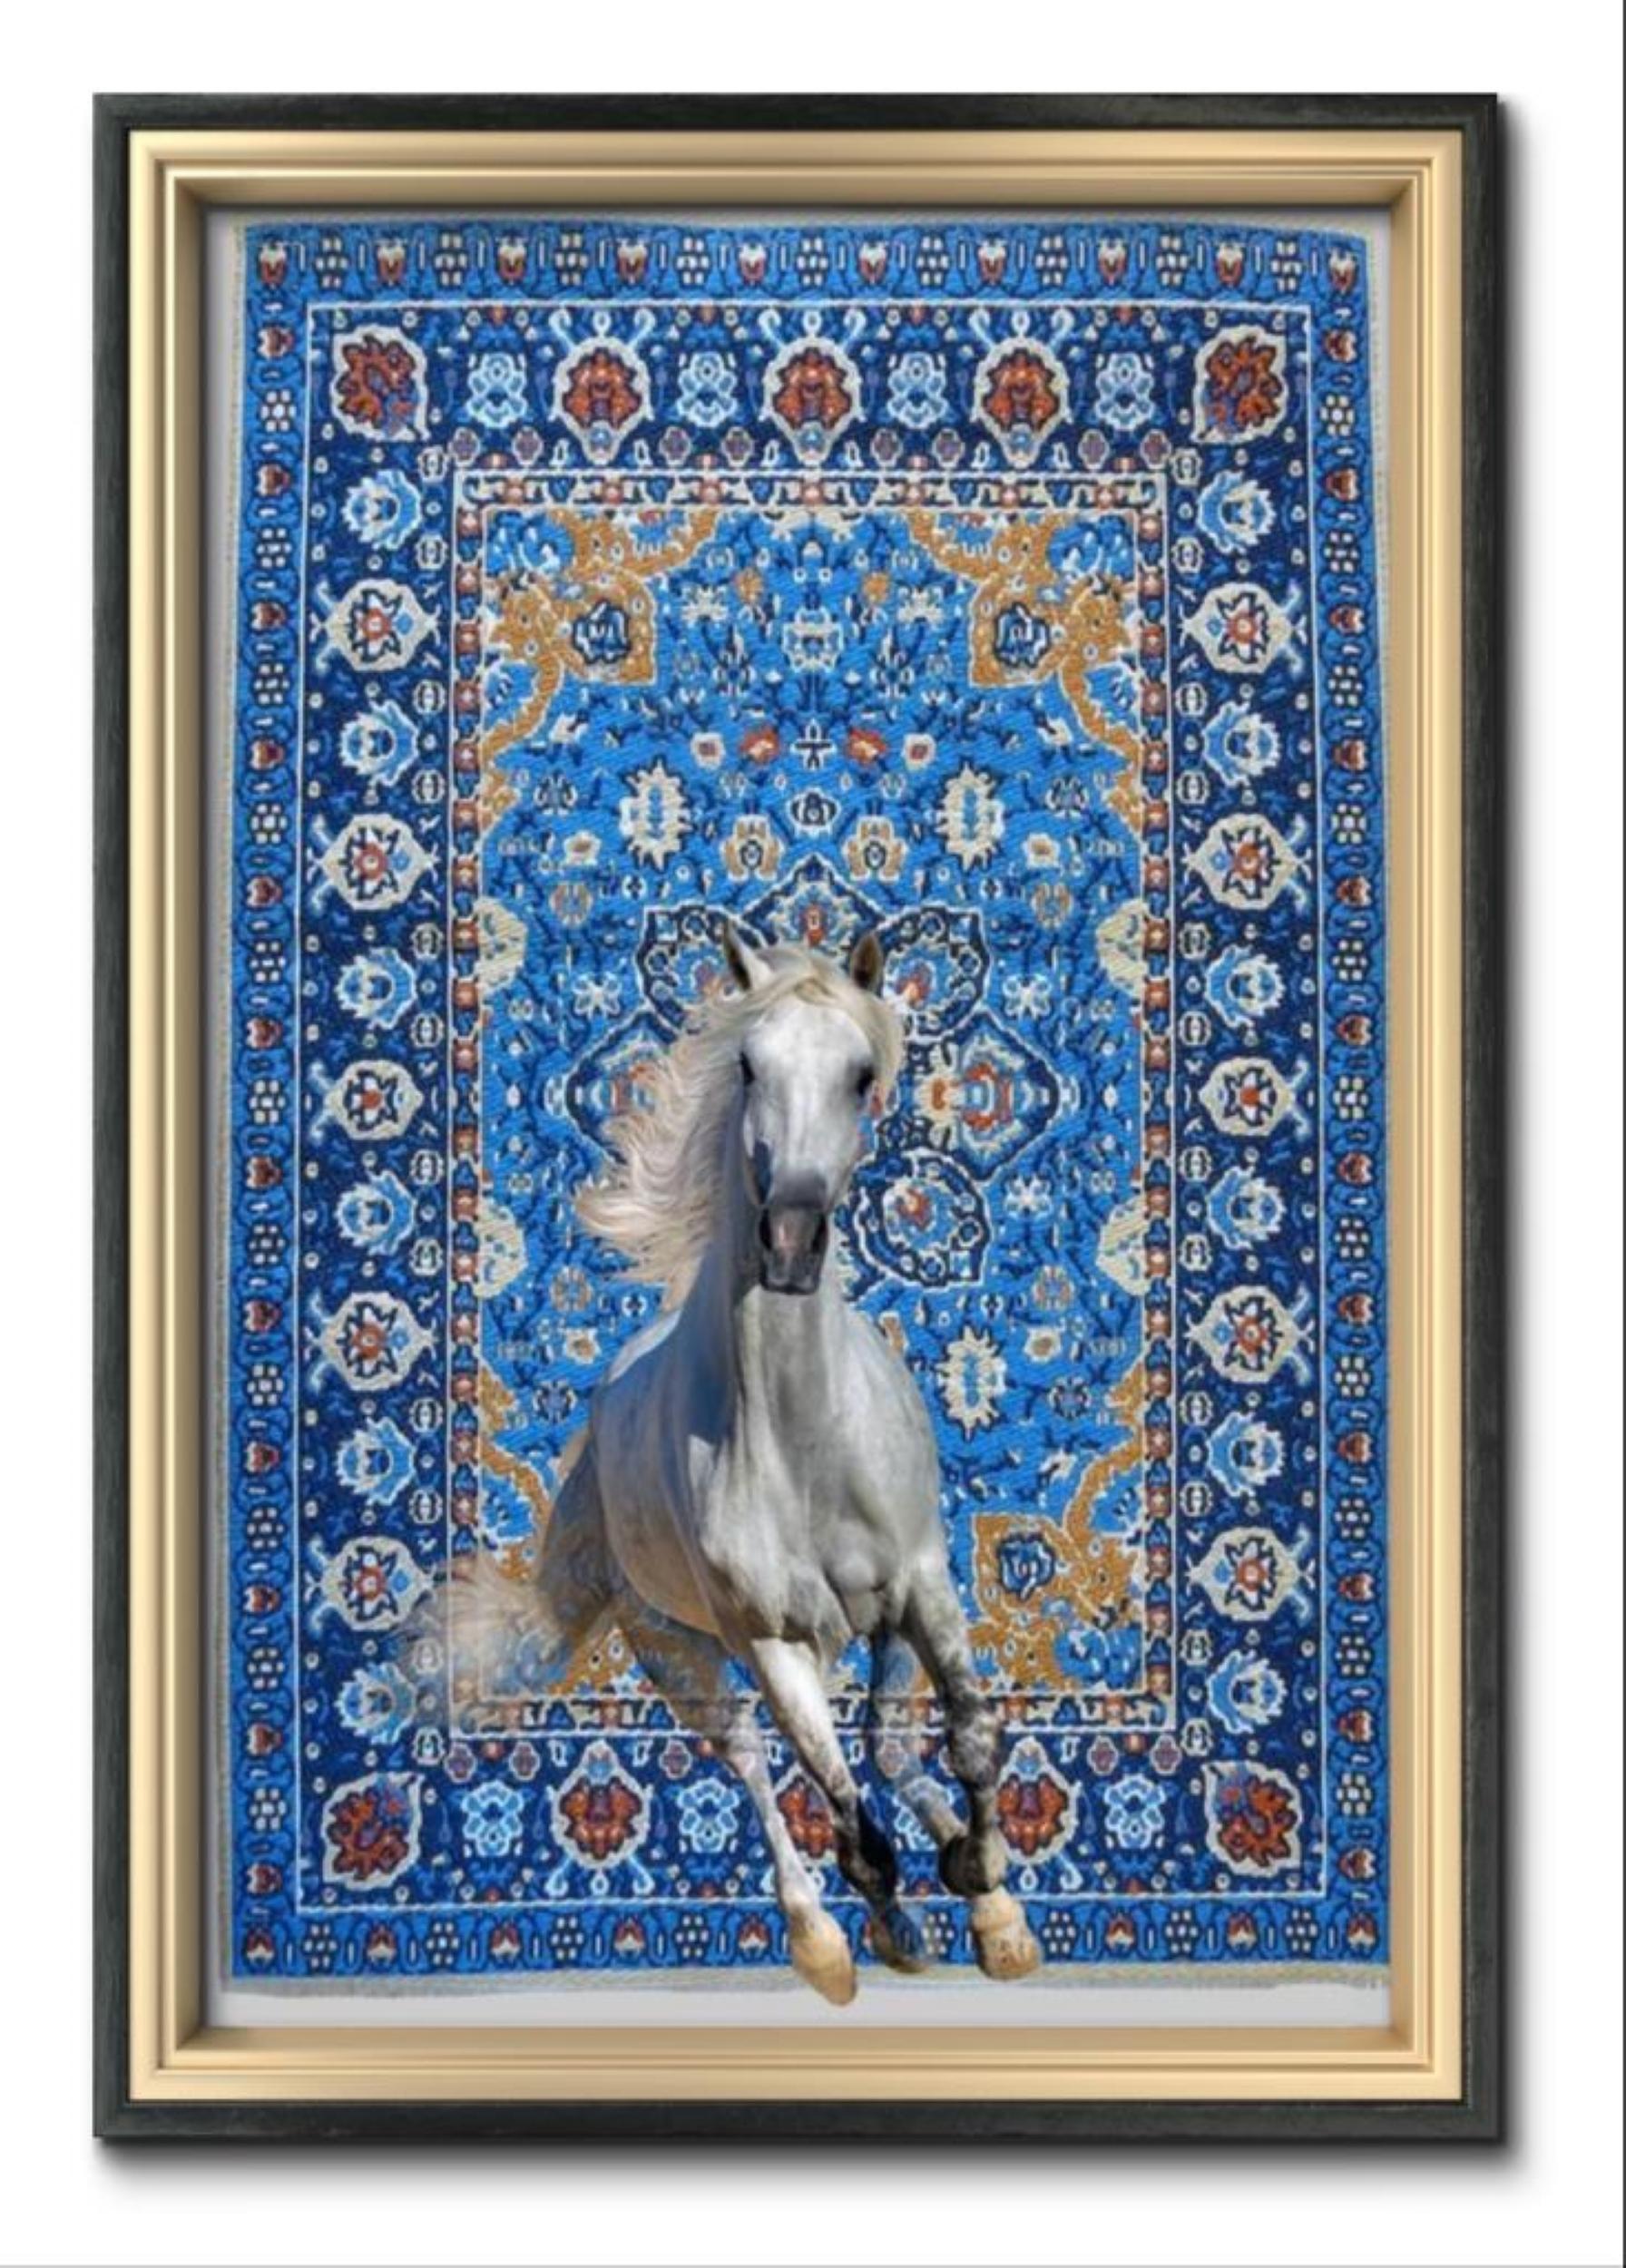 White Horse Morphing from Blue Tapestry 